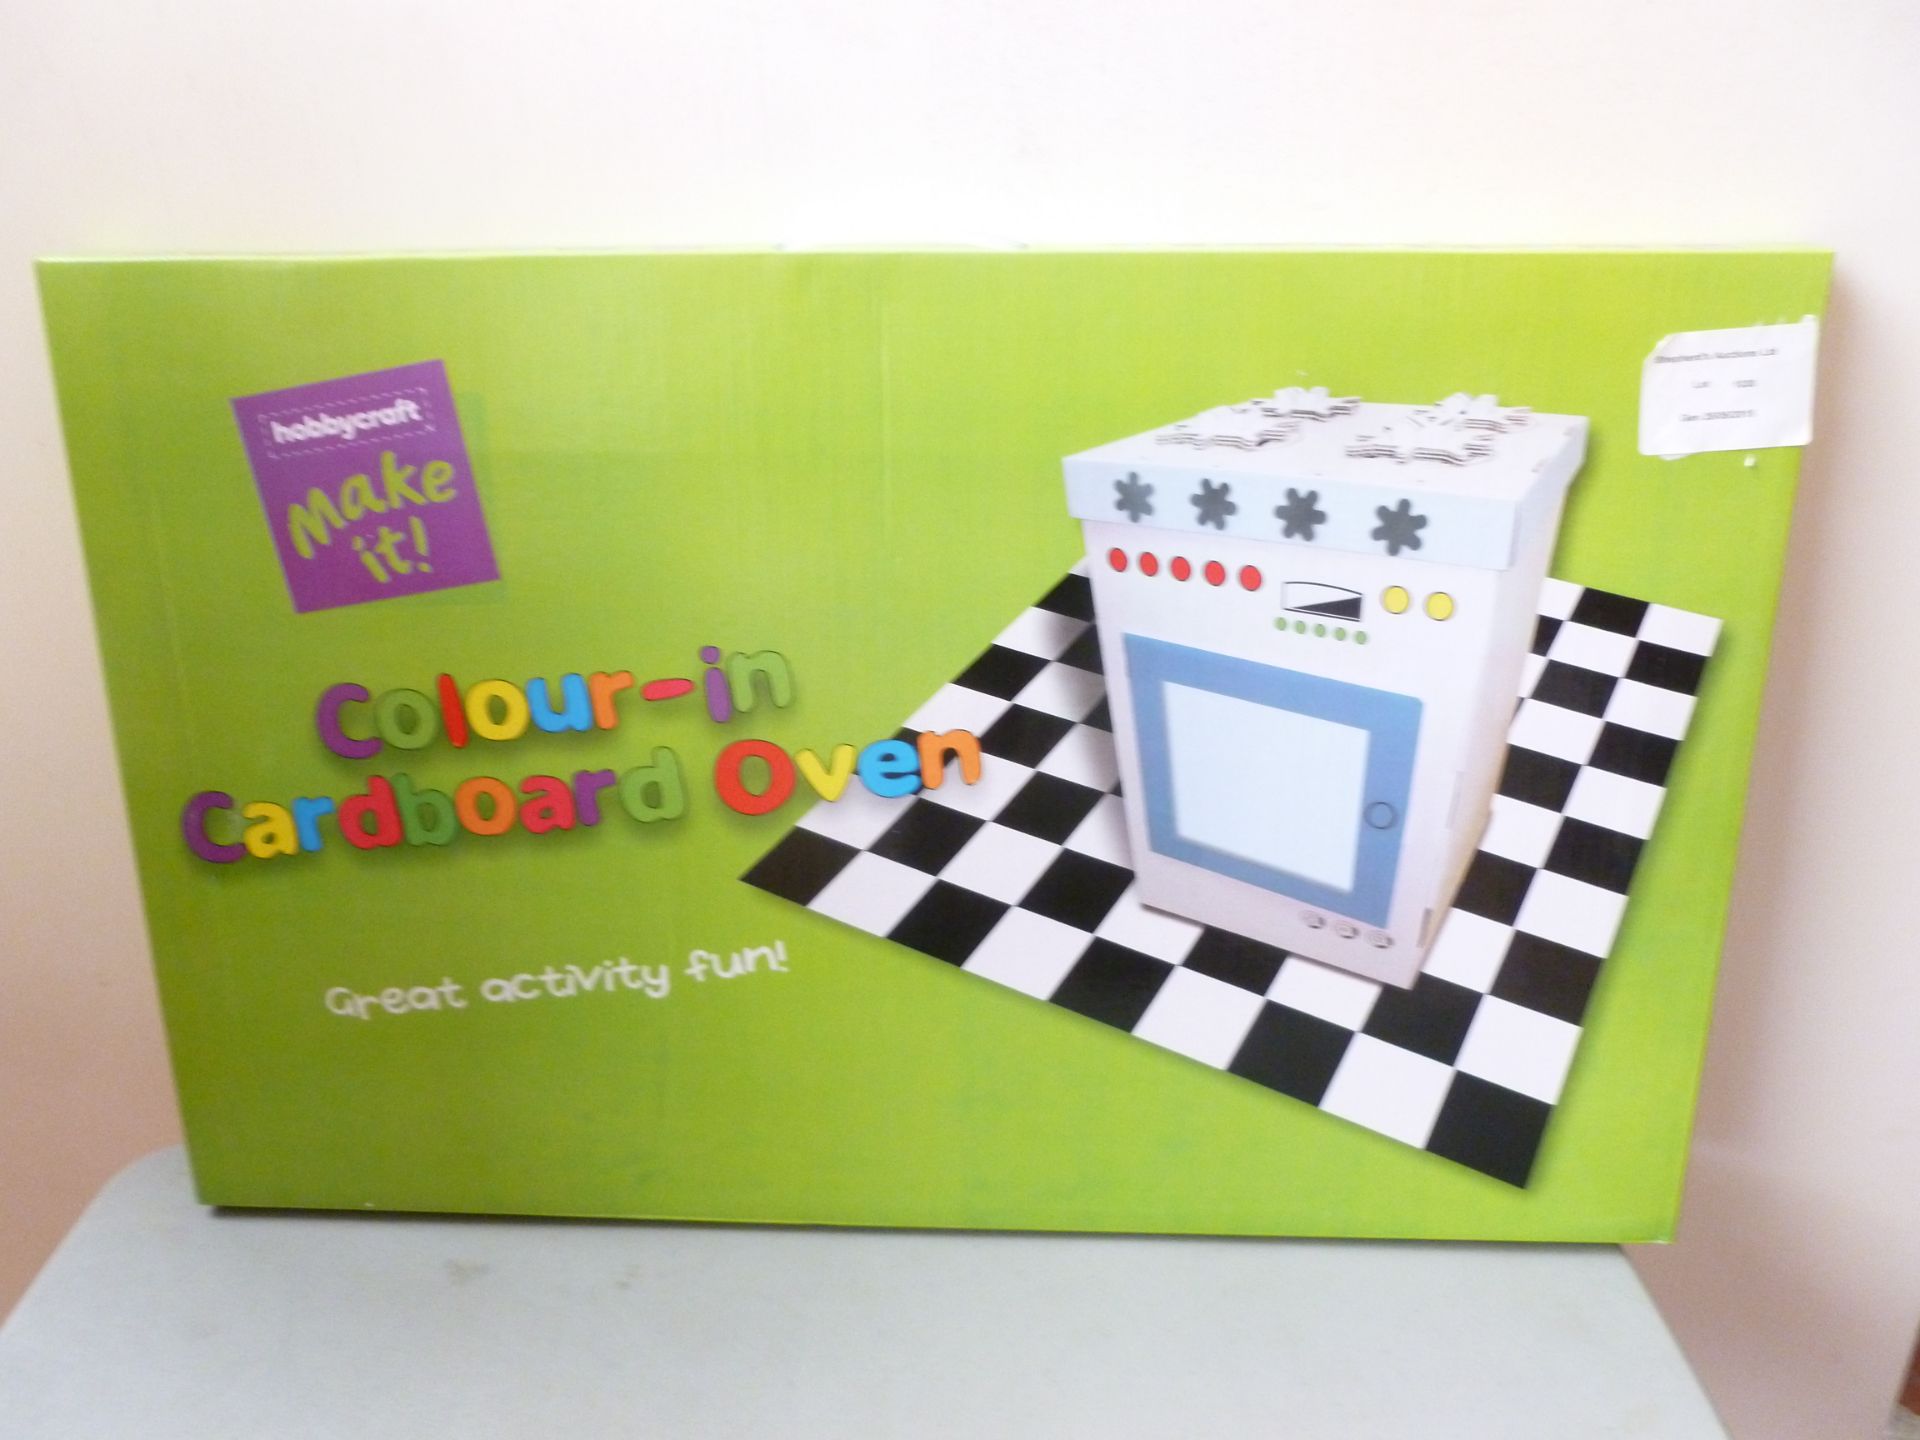 HobbyCraft Colour-In Cardboard Oven New and boxed.